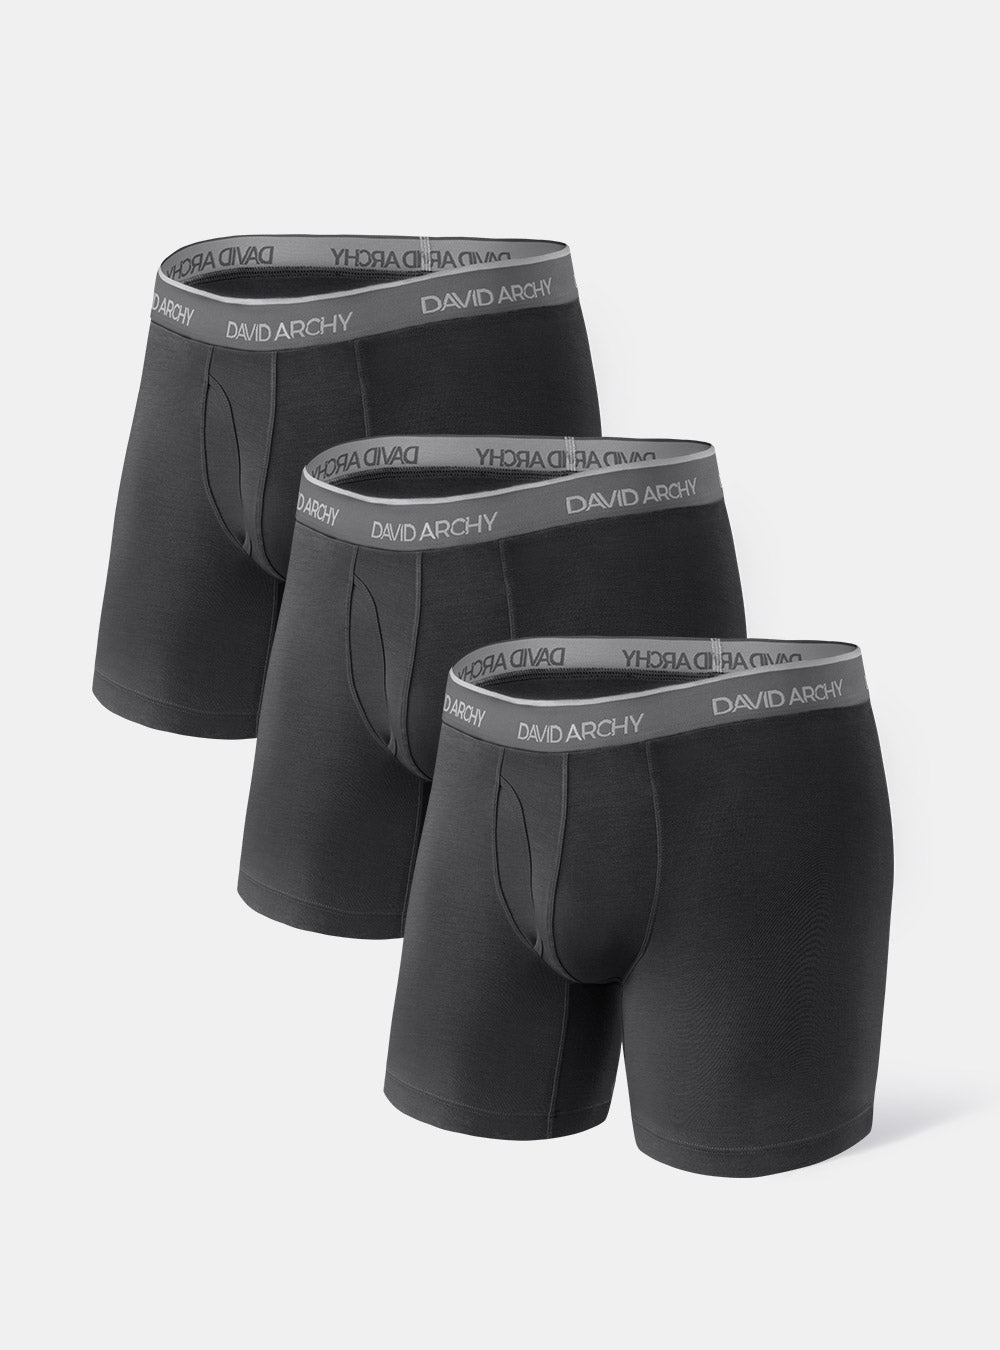  DAVID ARCHY Men's 3 Pack Soft Cotton-Modal Blend Trunks  Breathable Pouch Underwear No Fly (S, Black/Brownish Gray/Navy Blue) :  Clothing, Shoes & Jewelry